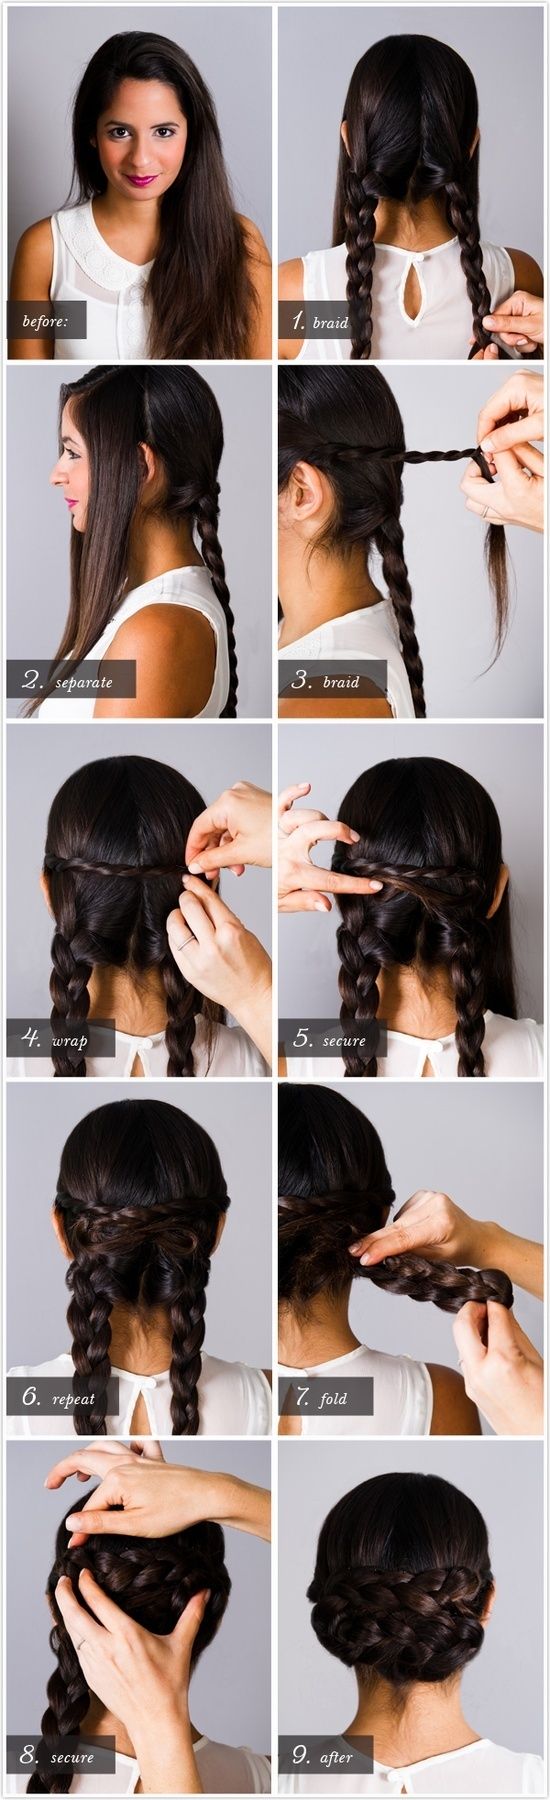 Great tutorials for gorgeous hairstyles 13 15 Simple and Cute Hairstyle Tutorials 